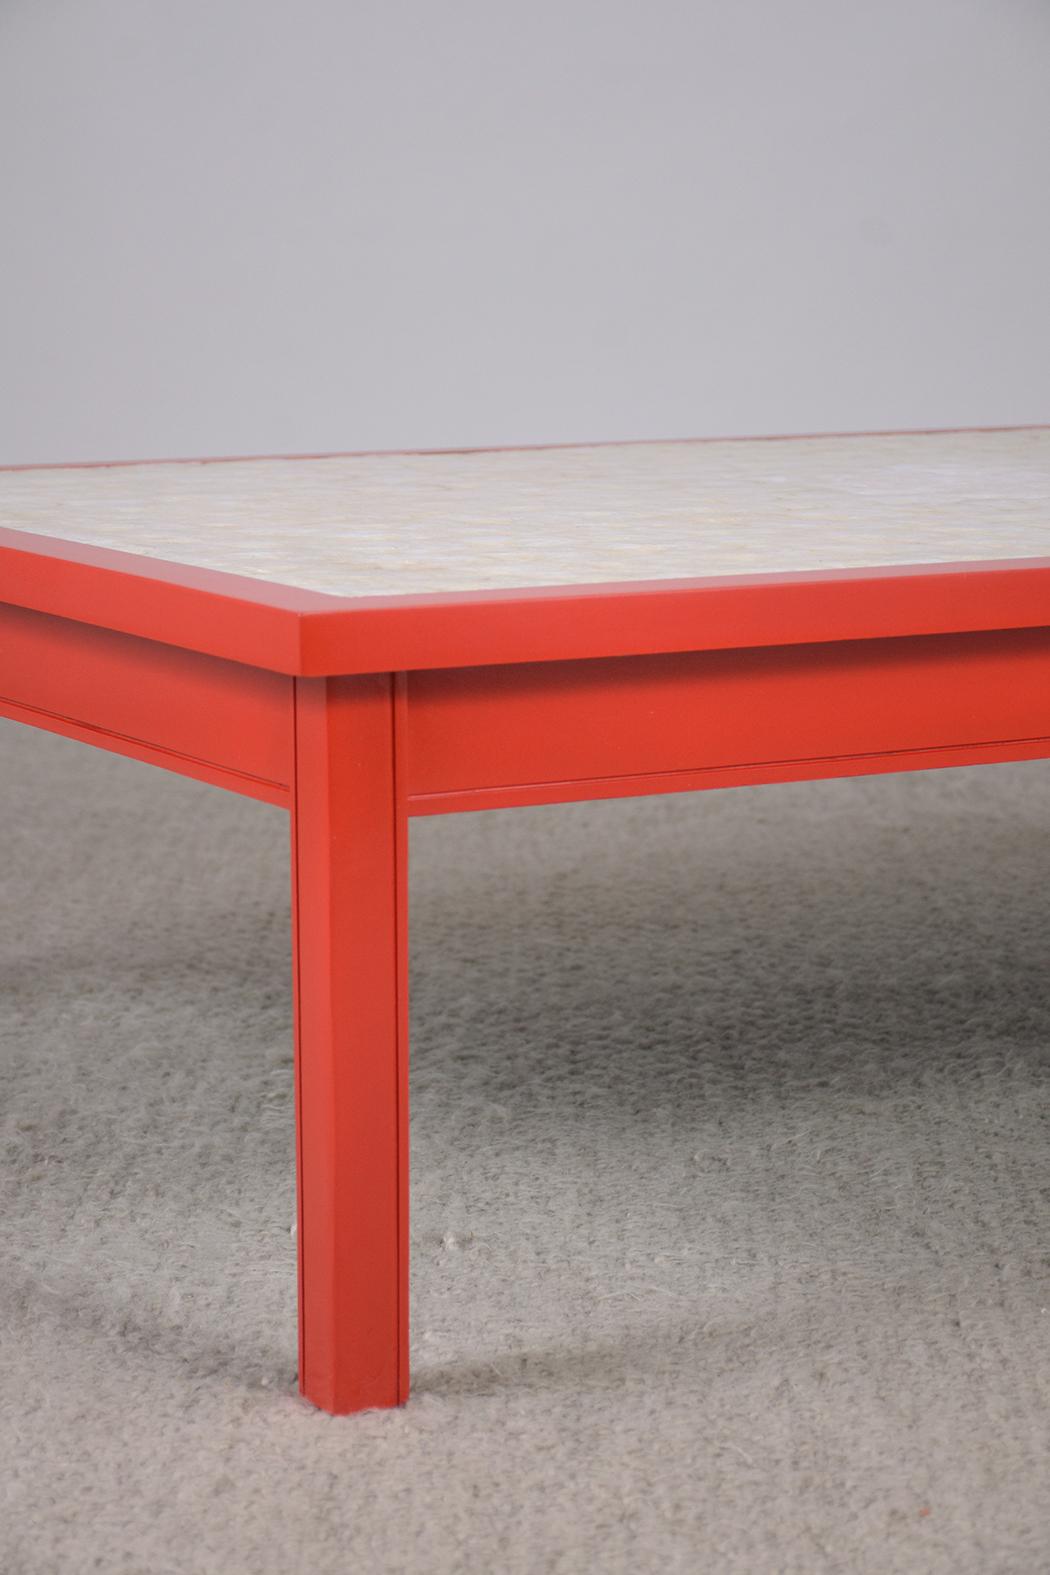 Late 20th Century Vibrant Red Mid-Century Modern Coffee Table with Mother-of-Pearl Veneer For Sale